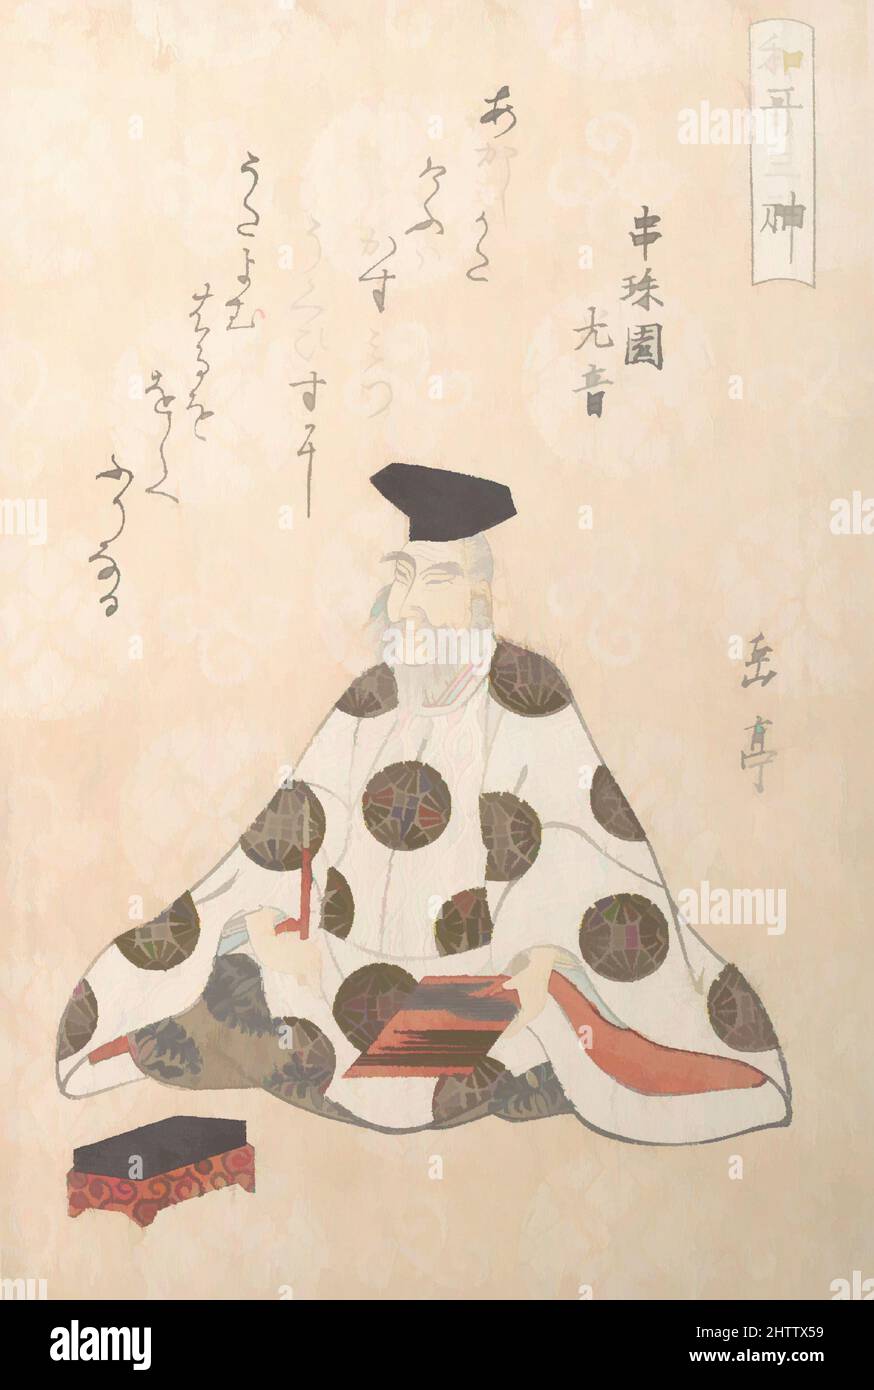 Art inspired by 『和歌三神』柿本人麻呂, Edo period (1615–1868), ca. 1820s, Japan, Polychrome woodblock print (surimono); ink and color on paper, 8 x 5 1/4 in. (20.3 x 13.3 cm), Prints, Yashima Gakutei (Japanese, 1786?–1868), Surimono are privately published woodblock prints, usually commissioned, Classic works modernized by Artotop with a splash of modernity. Shapes, color and value, eye-catching visual impact on art. Emotions through freedom of artworks in a contemporary way. A timeless message pursuing a wildly creative new direction. Artists turning to the digital medium and creating the Artotop NFT Stock Photo